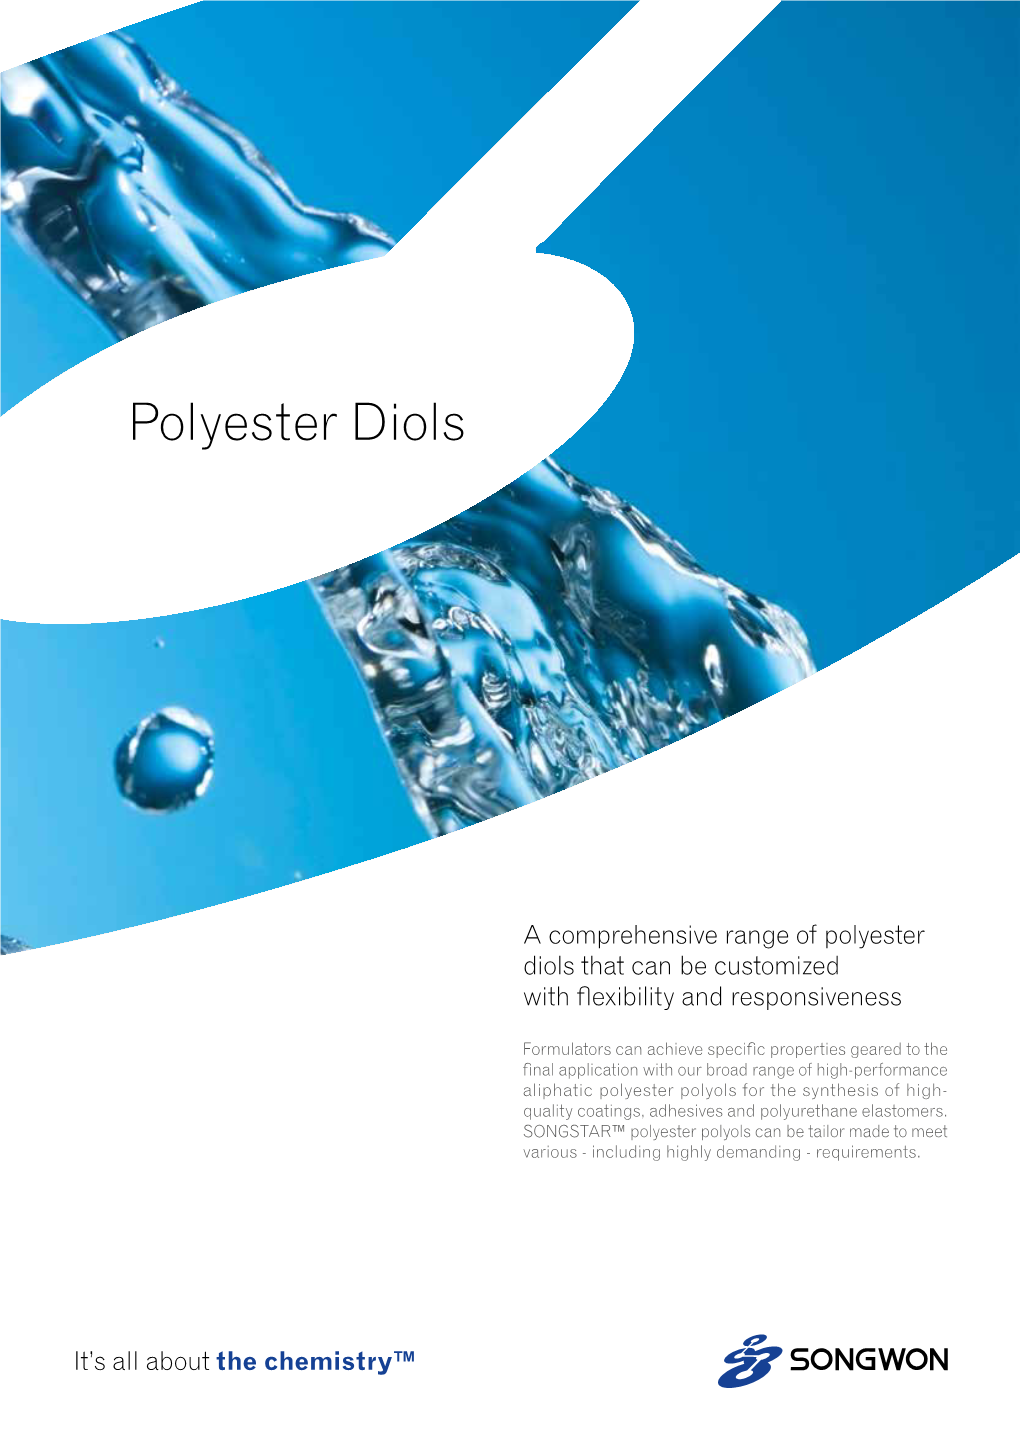 Polyester Diols